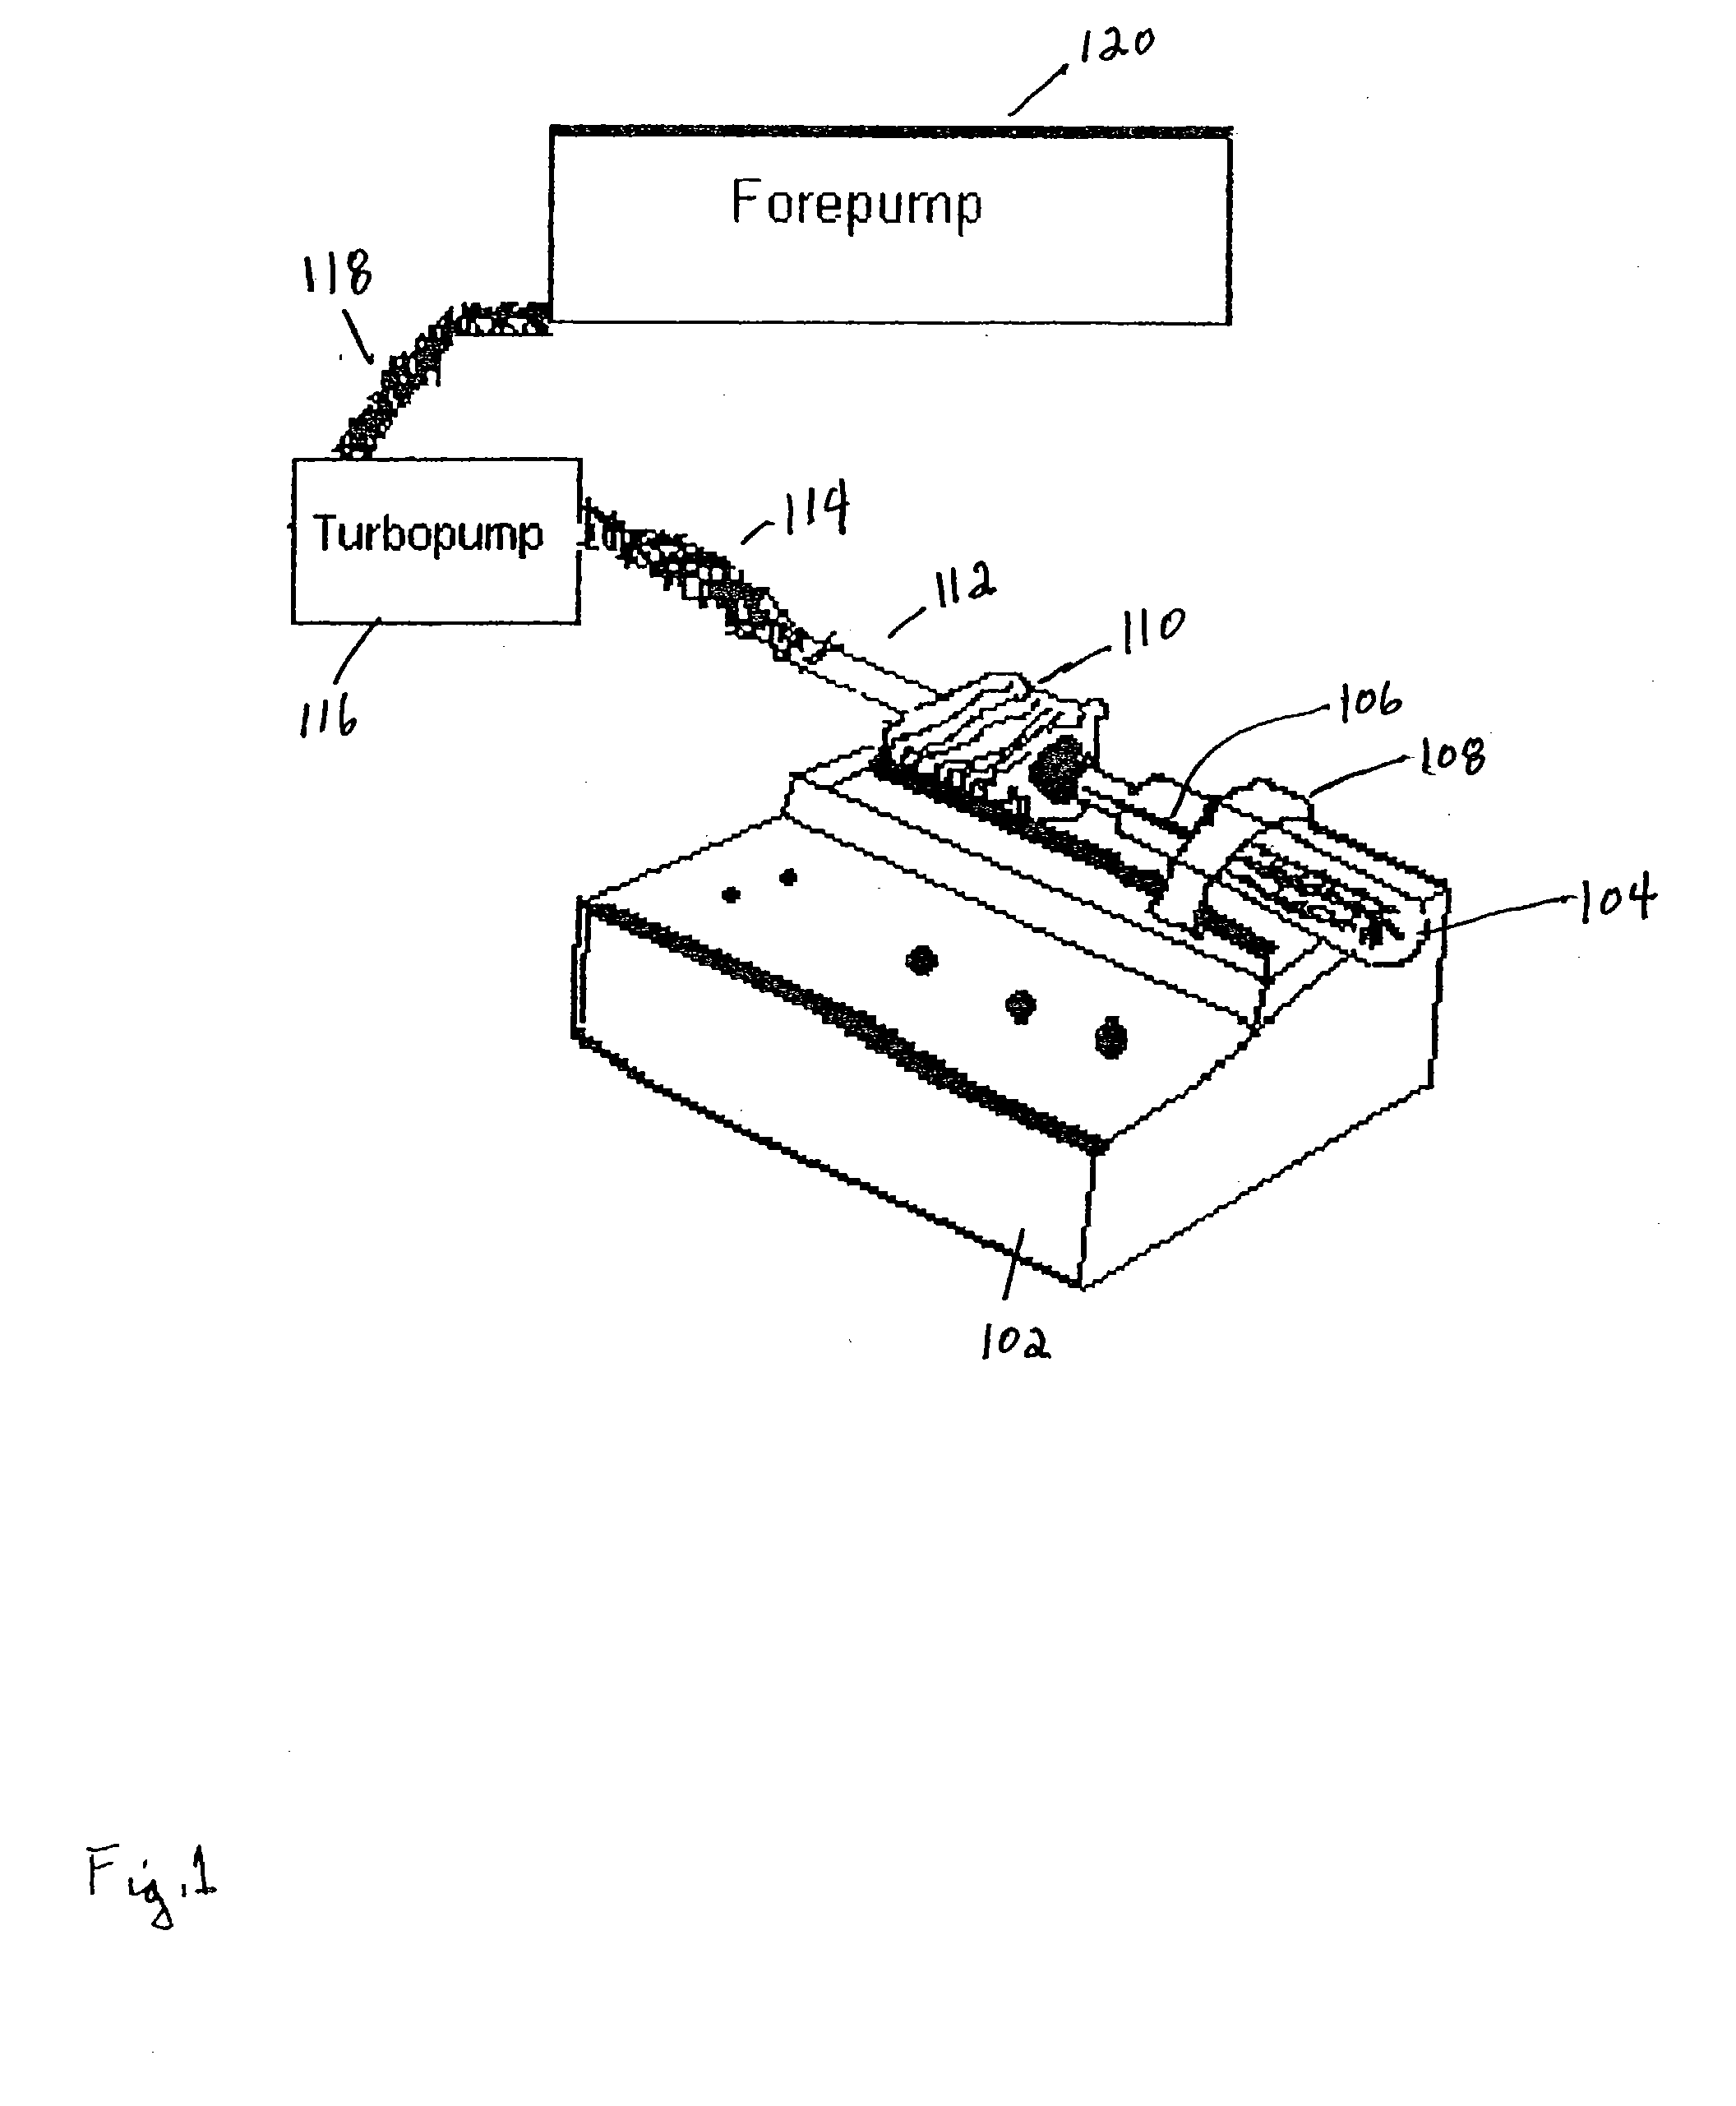 Standards for the calibration of a vacuum thermogravimetric analyzer for determination of vapor pressures of compounds